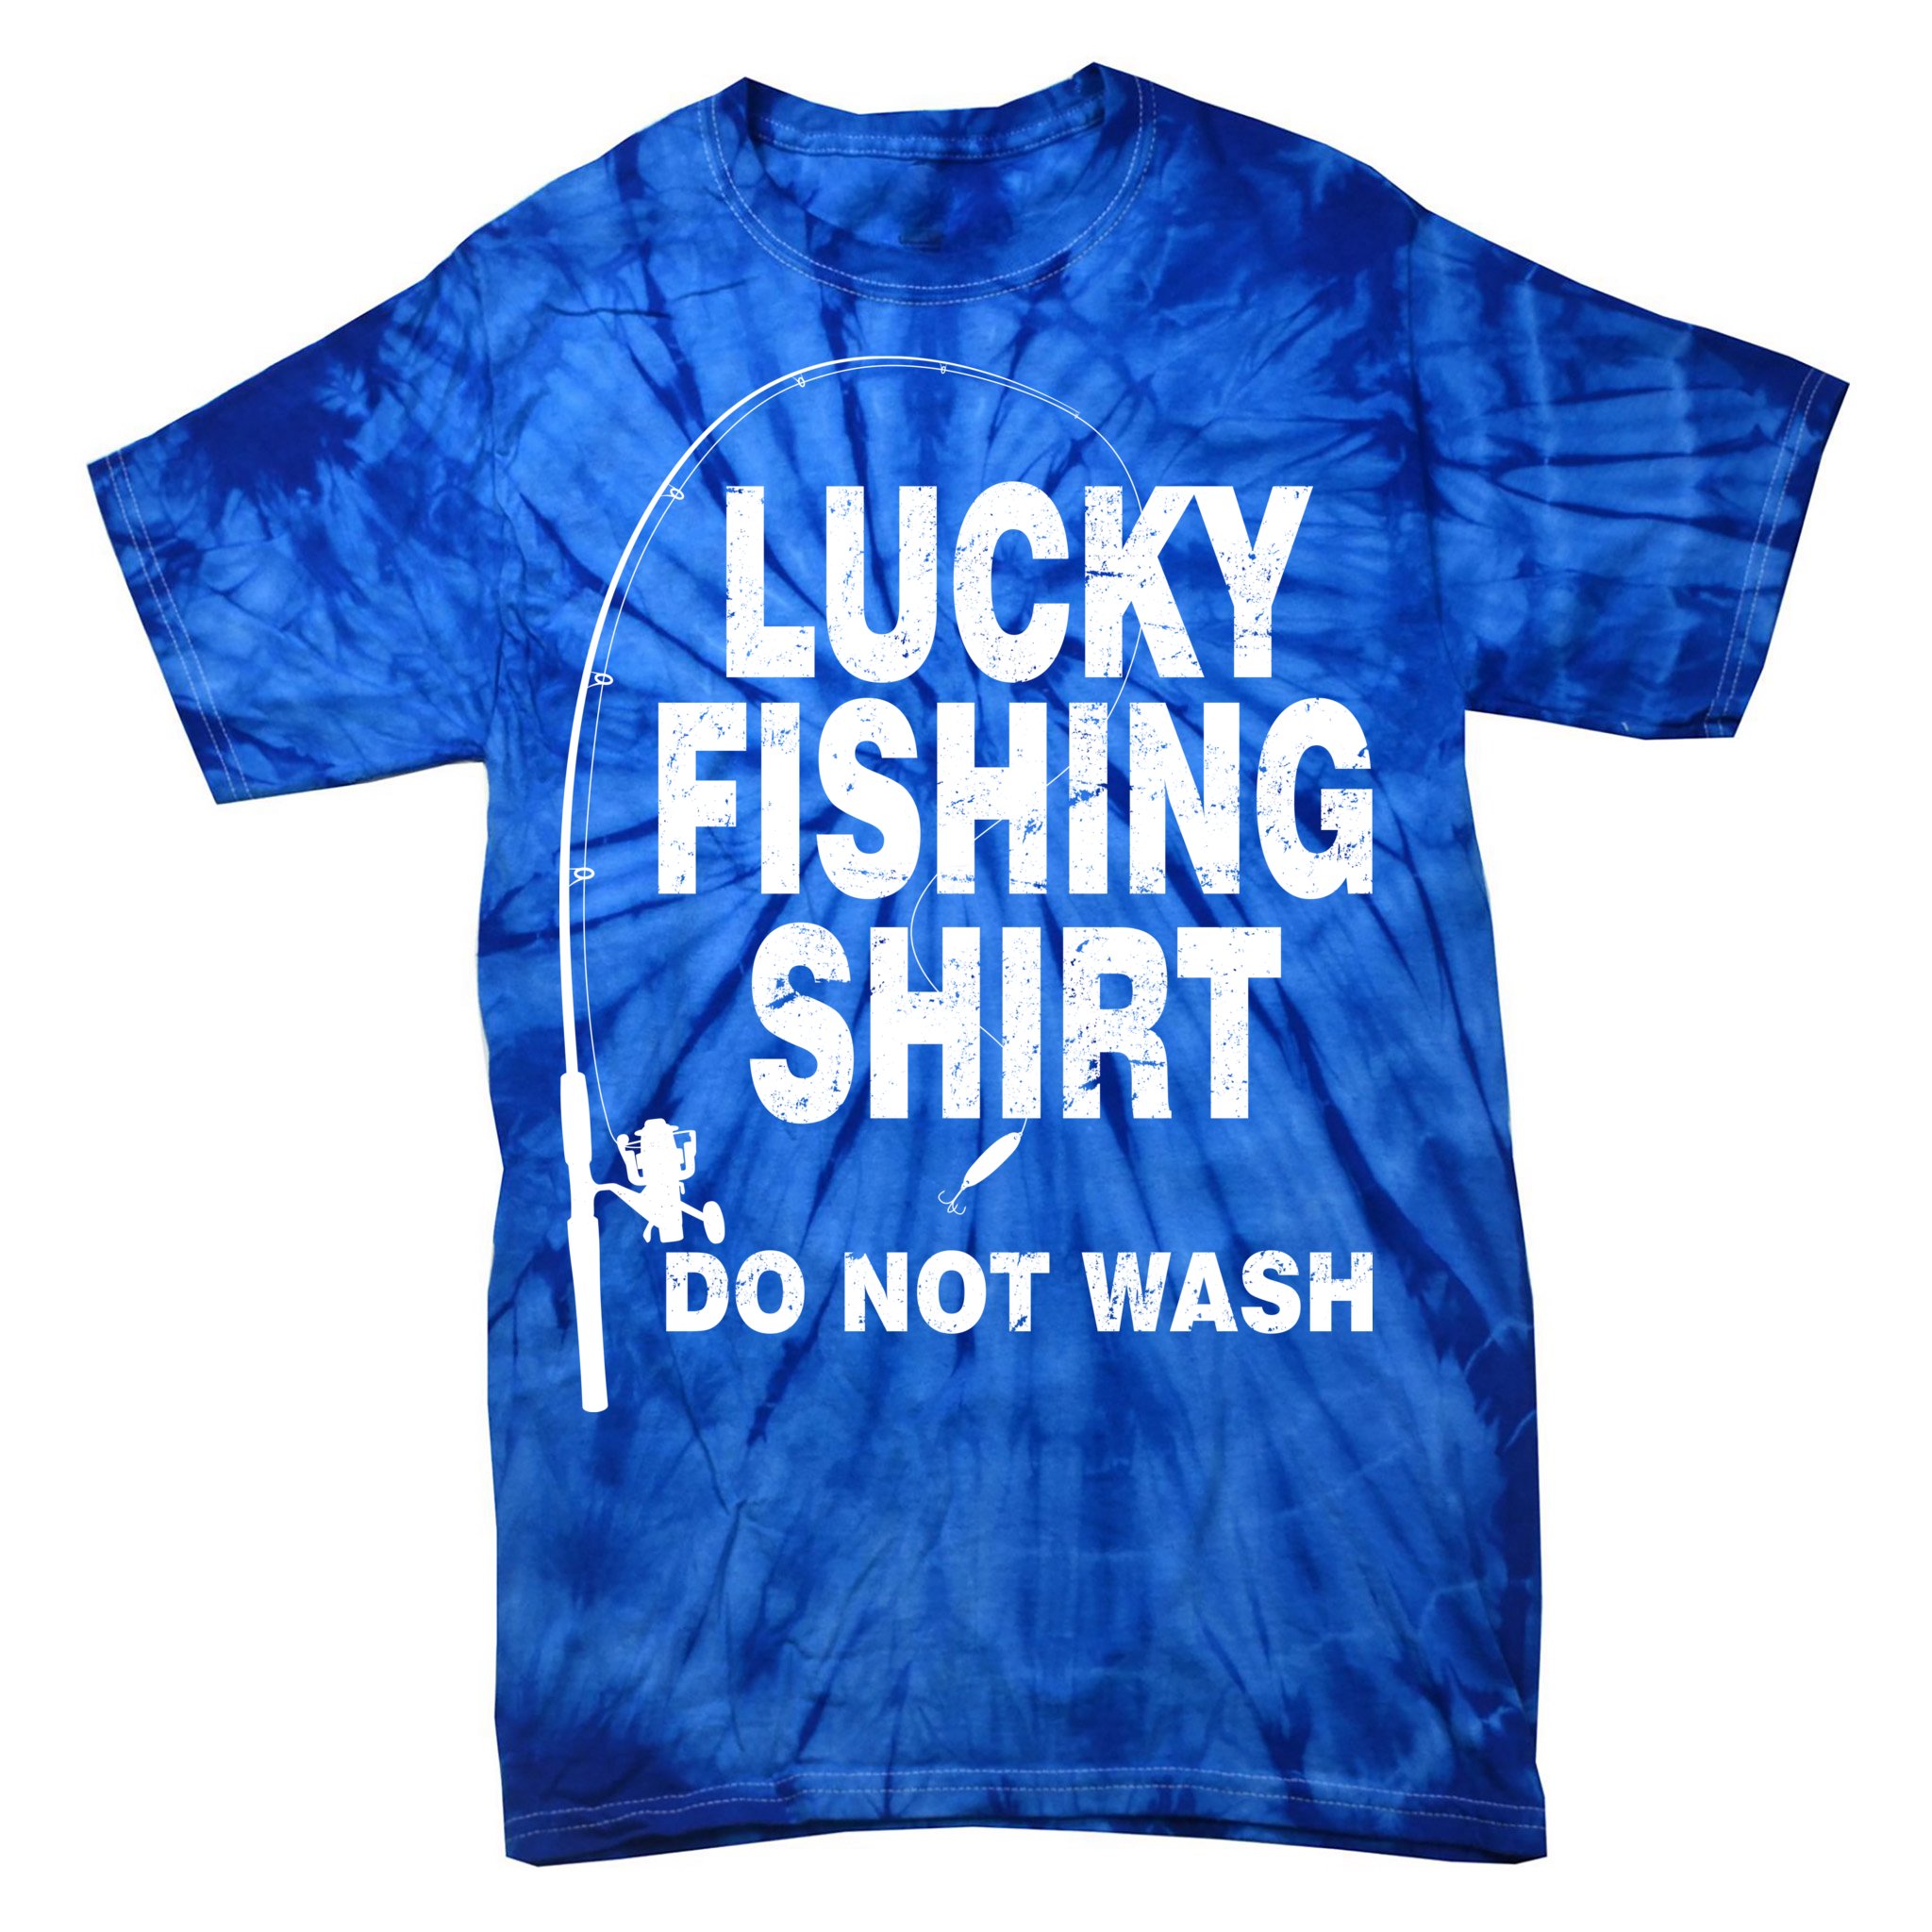 https://images3.teeshirtpalace.com/images/productImages/lucky-fishing-shirt-do-not-wash--blue-tds-garment.jpg